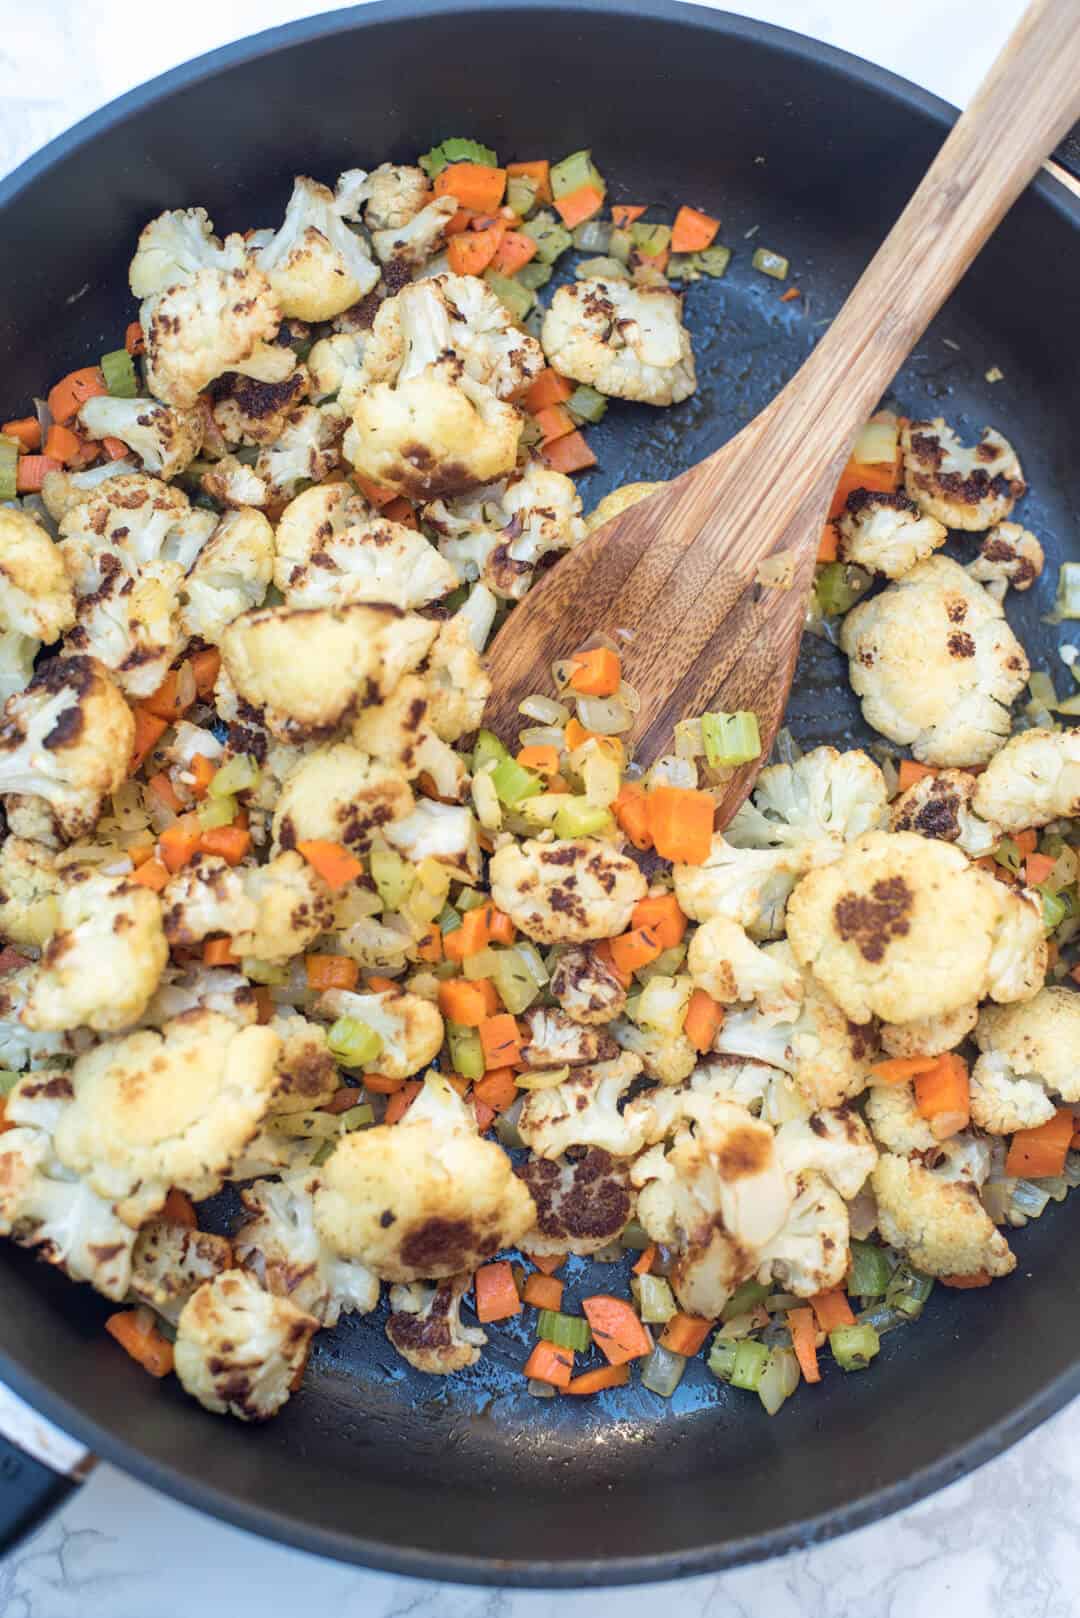 Roasted cauliflower, onion, carrots, and celery cook in a skillet.